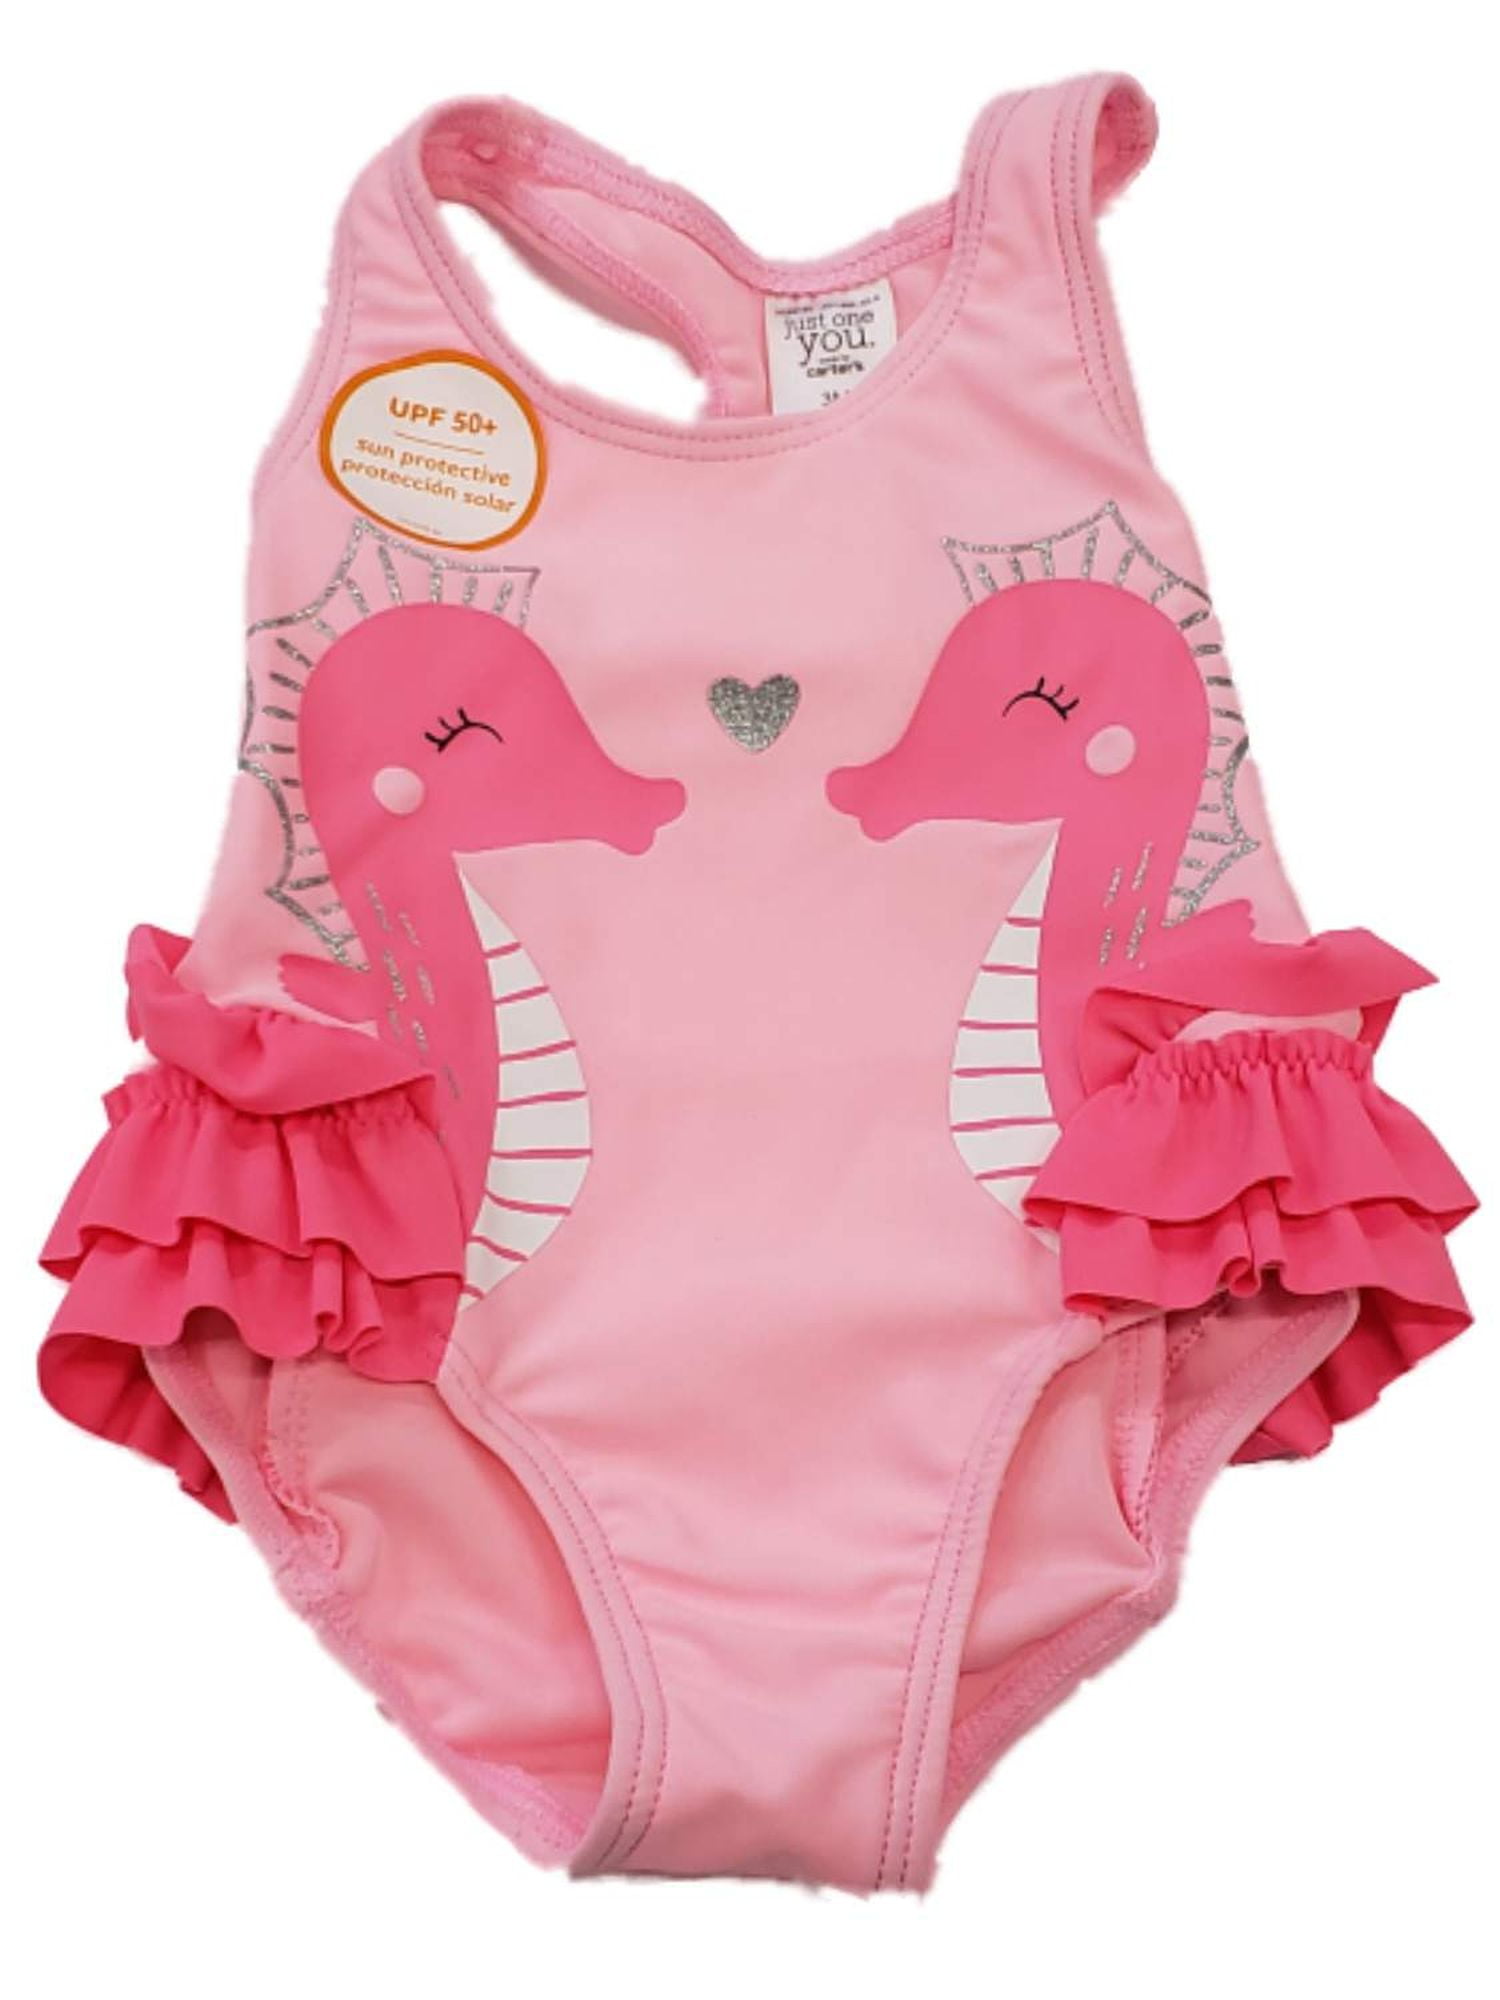 CARTERS SWIMSUIT 2 PIECE COVER UP SET CHILDRENS KIDS GIRLS SWIMWEAR SEAHORSE pc 